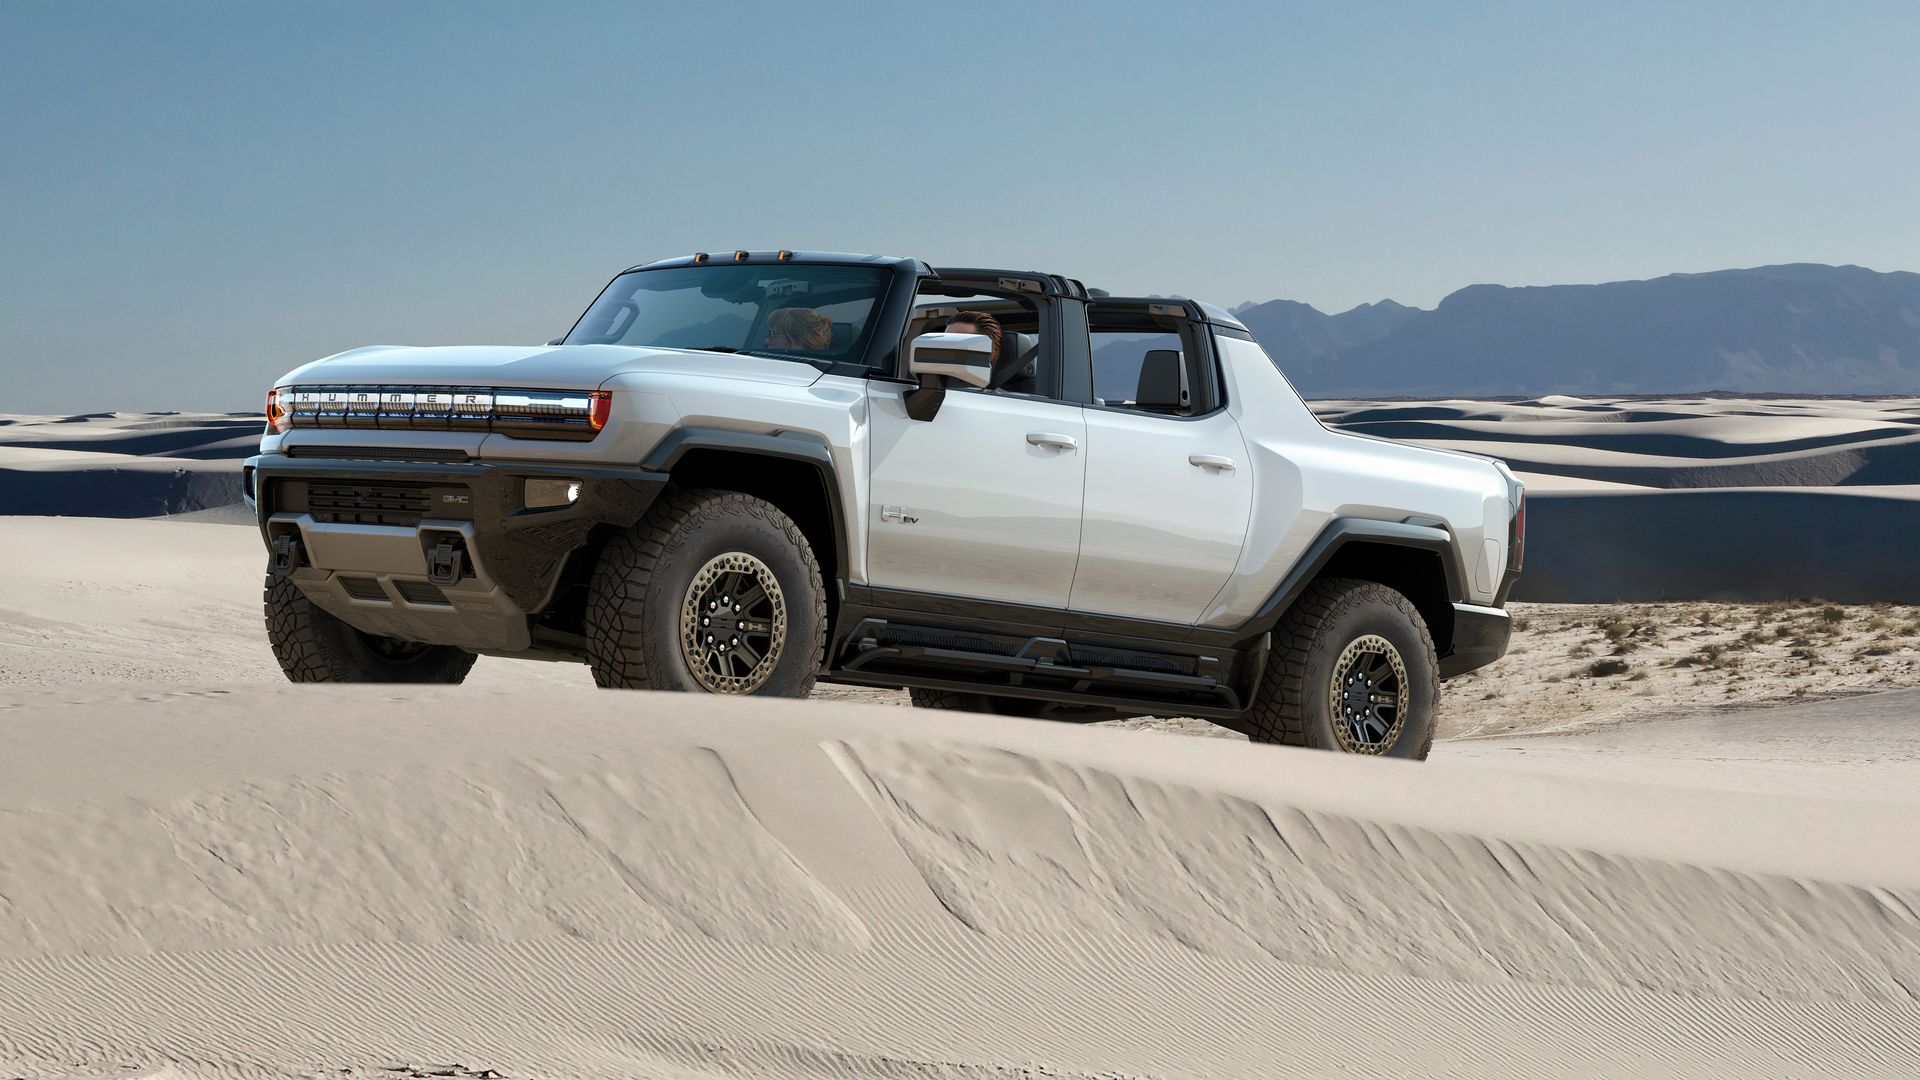 Image of the GMC Hummer EV in a desert environment